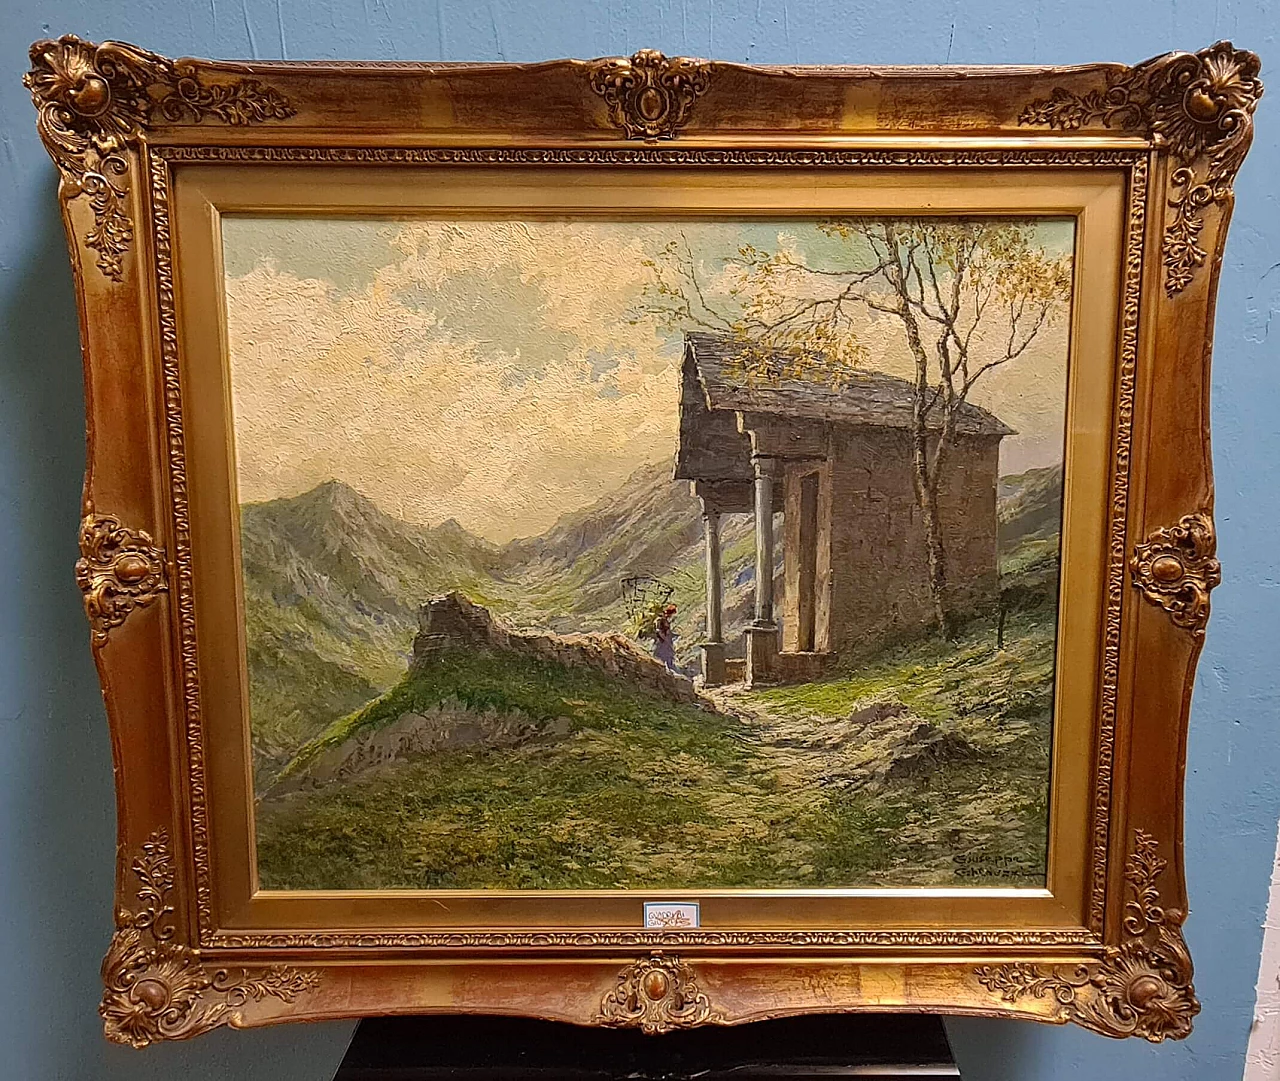 Giuseppe Gheduzzi, Landscape, oil on panel, early 20th century 1